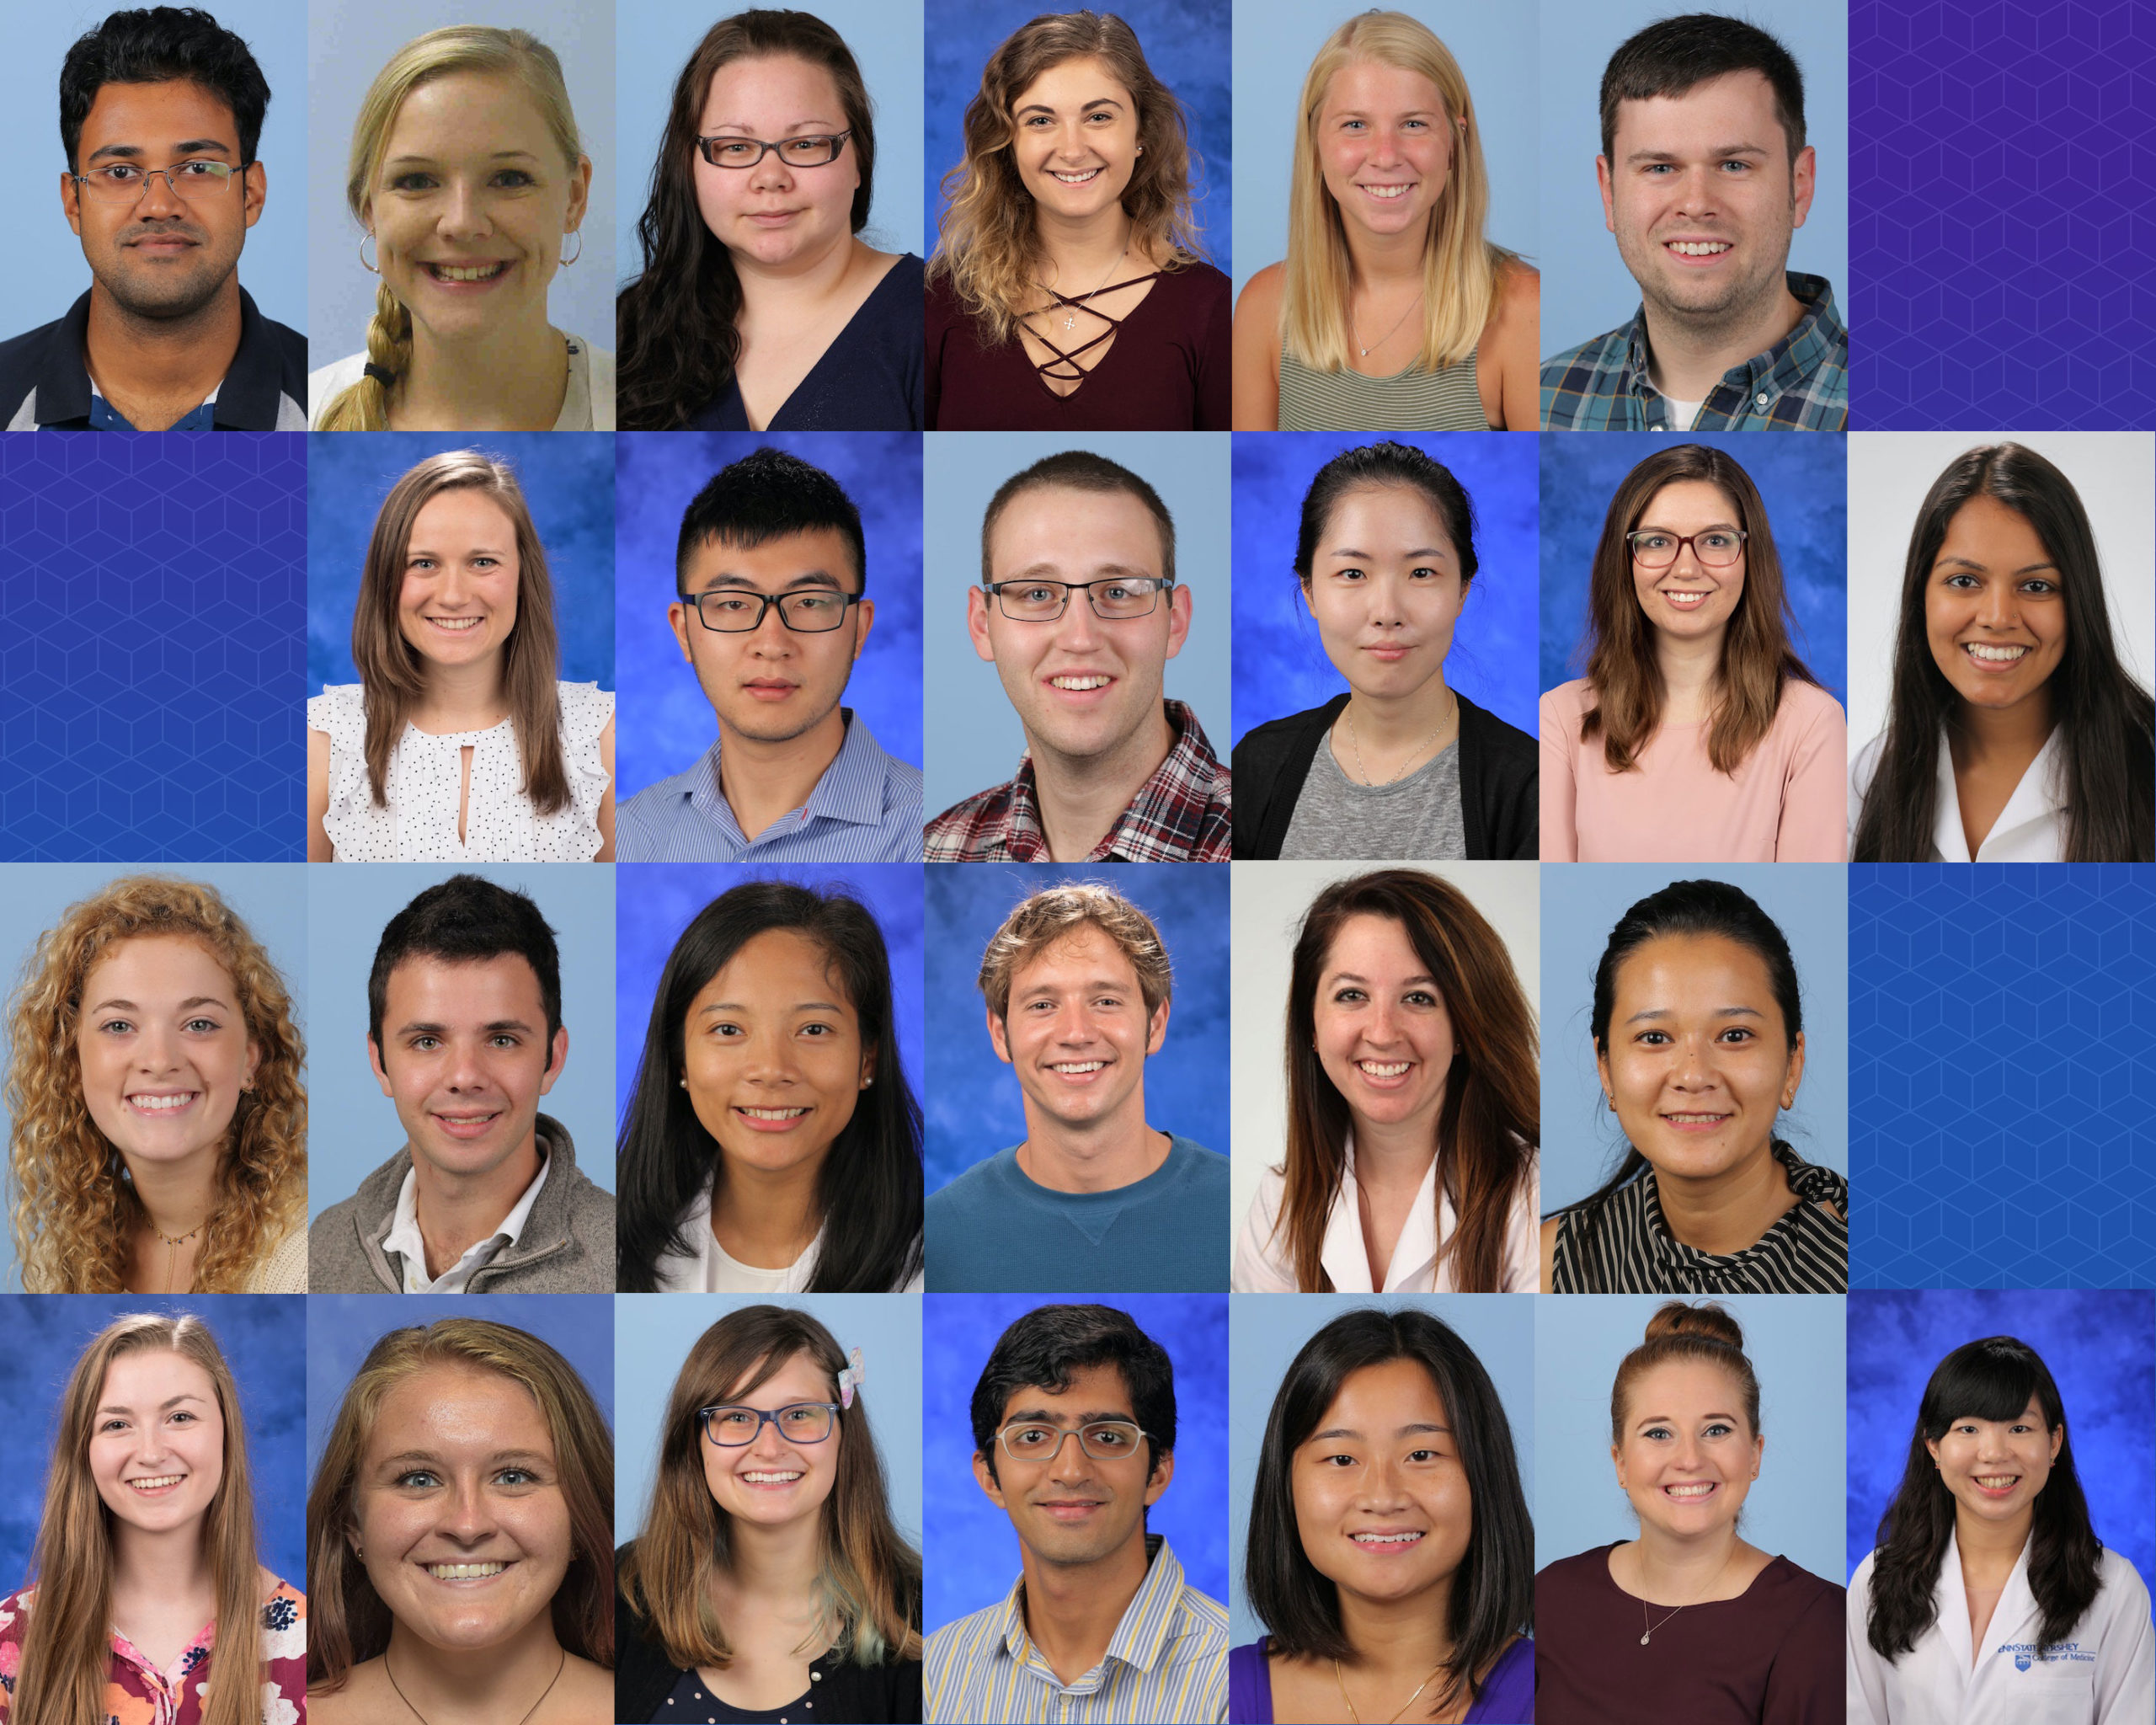 A collage shows professional head-and-shoulders photos of 25 Penn State College of Medicine graduate students.